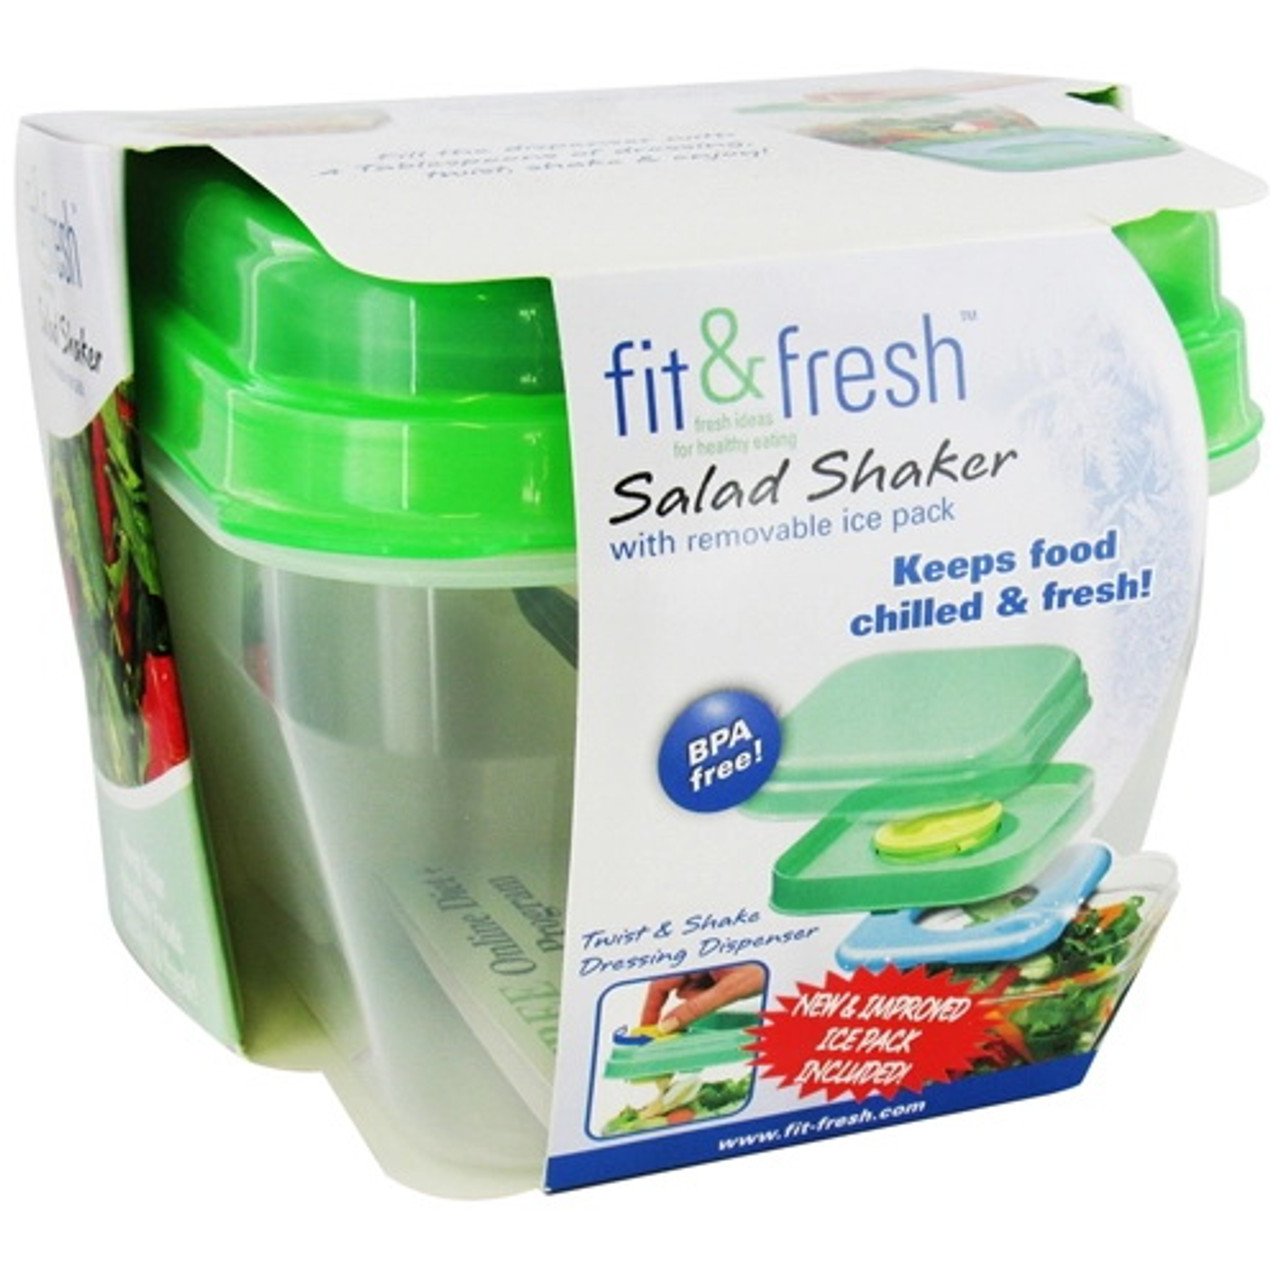 Fit & Fresh Salad Shaker Reusable Plastic Container